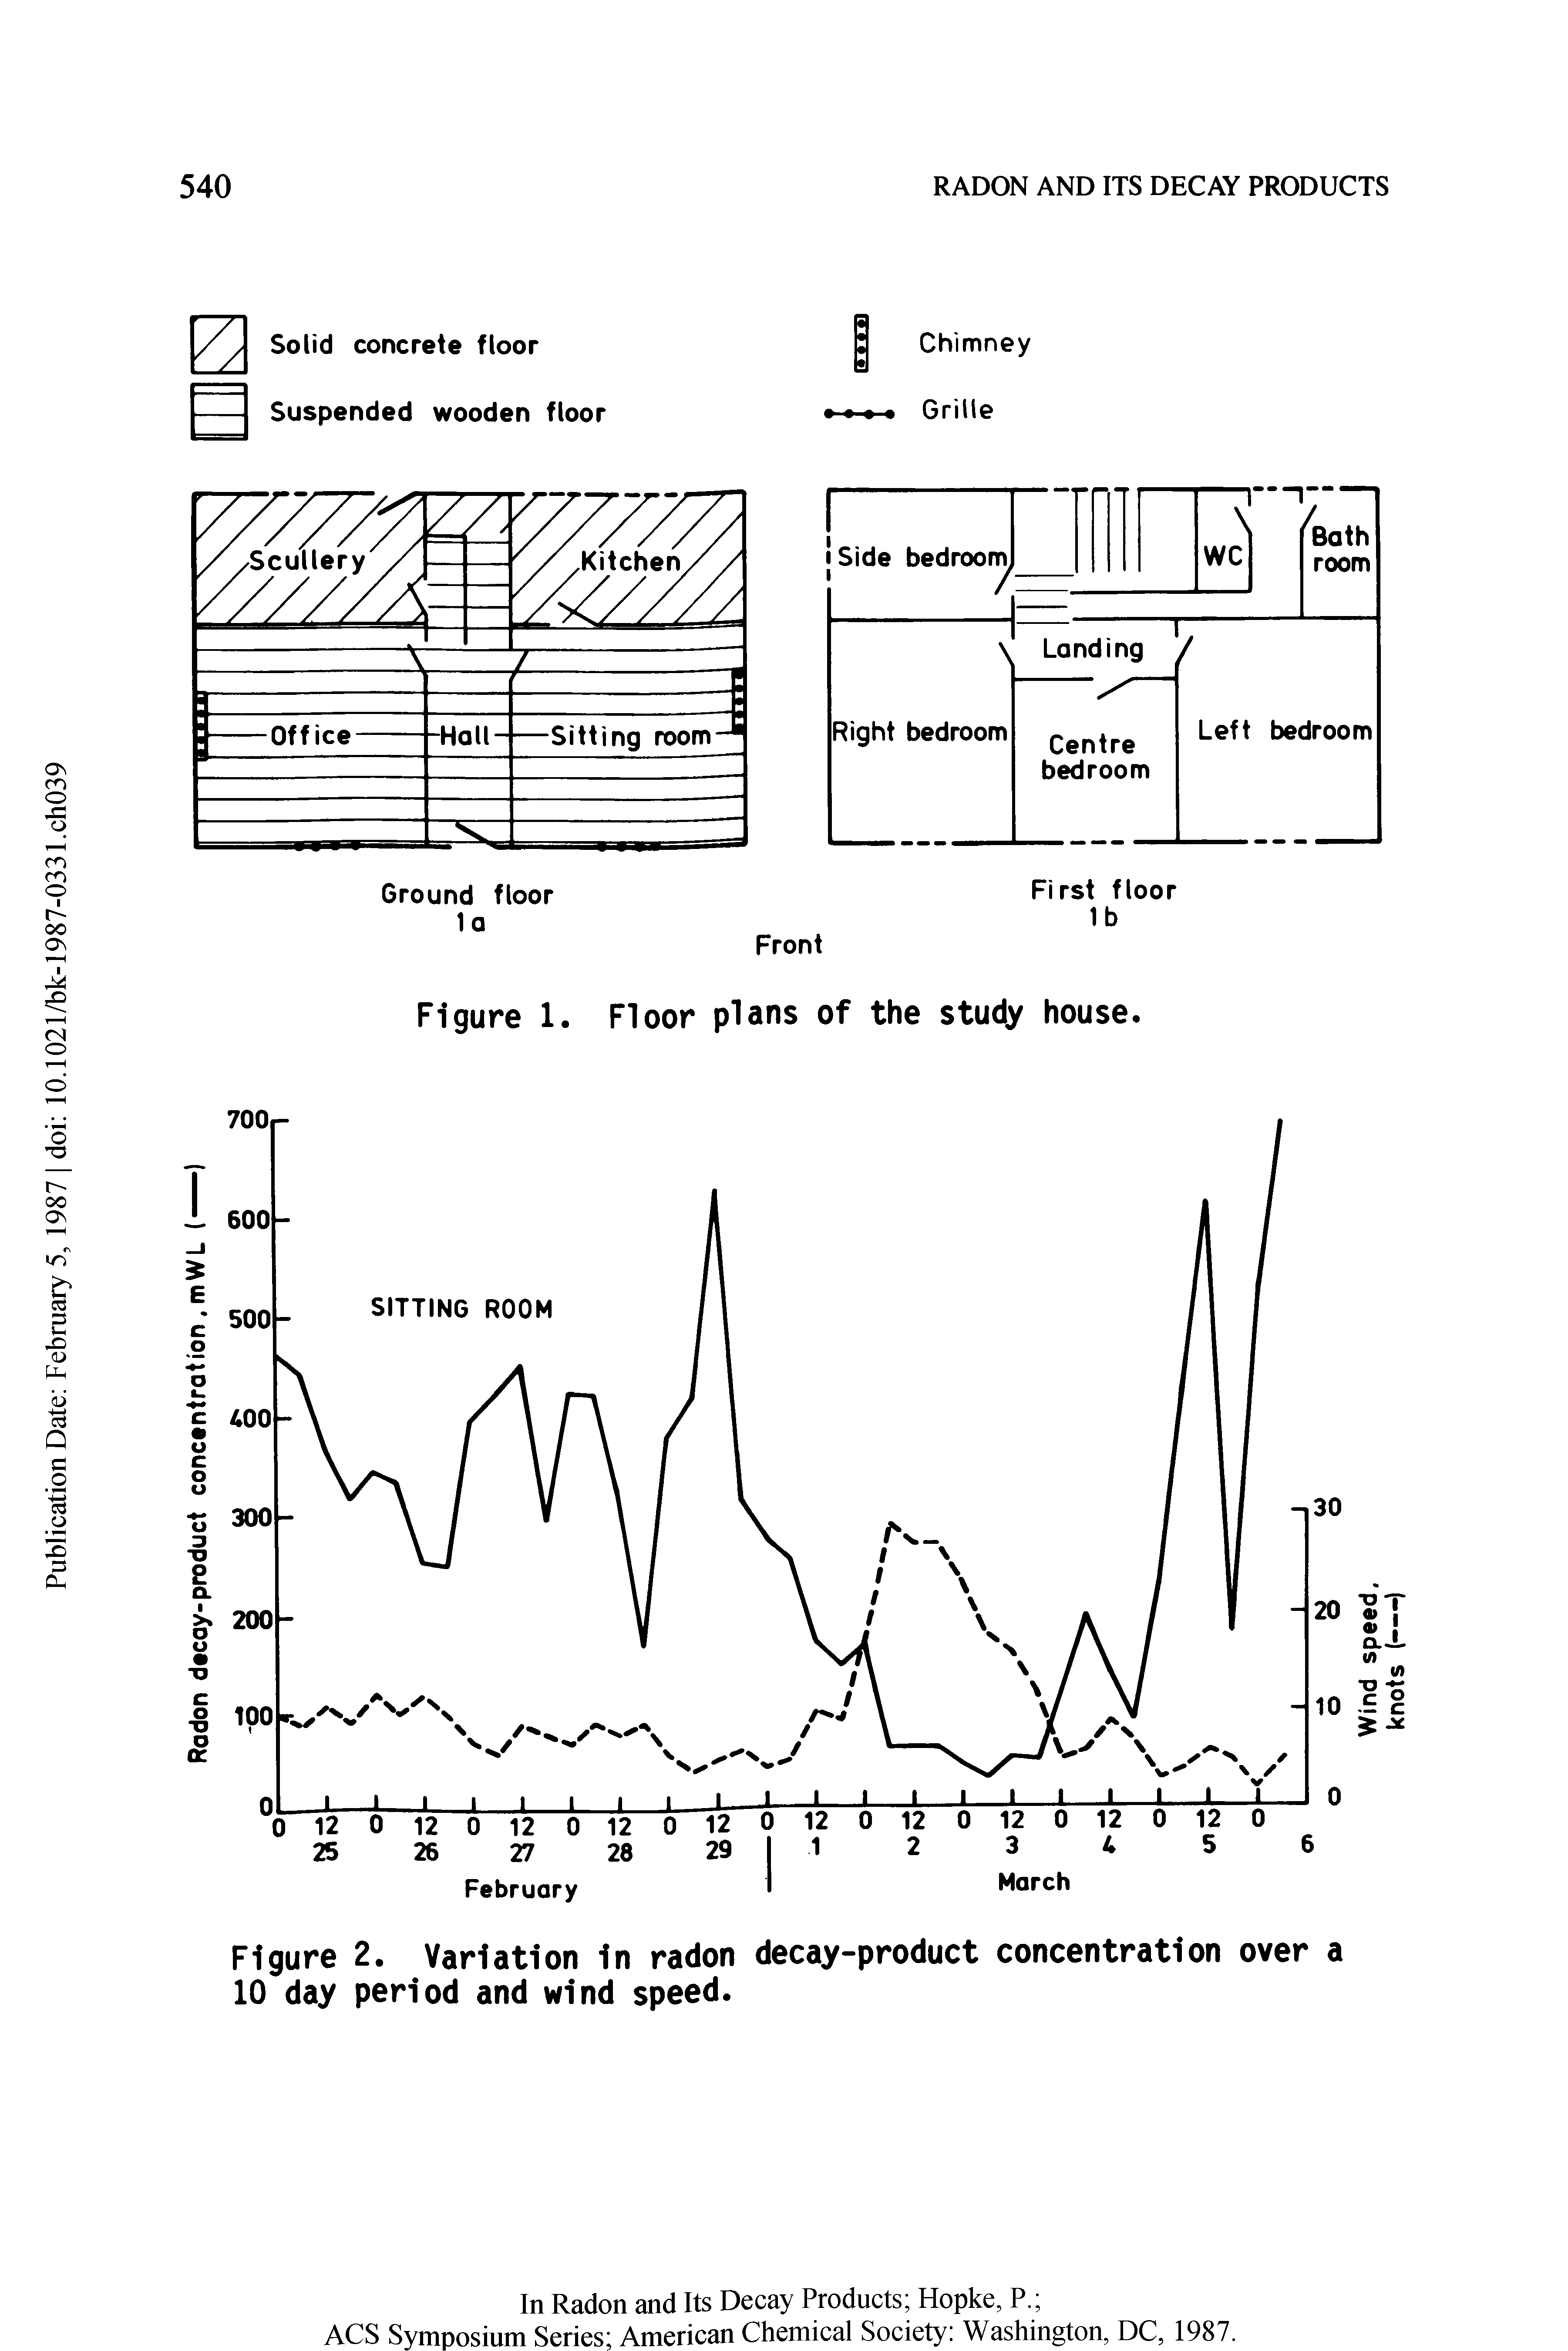 Figure 2. Variation 1n radon decay-product concentration over a 10 day period and wind speed.